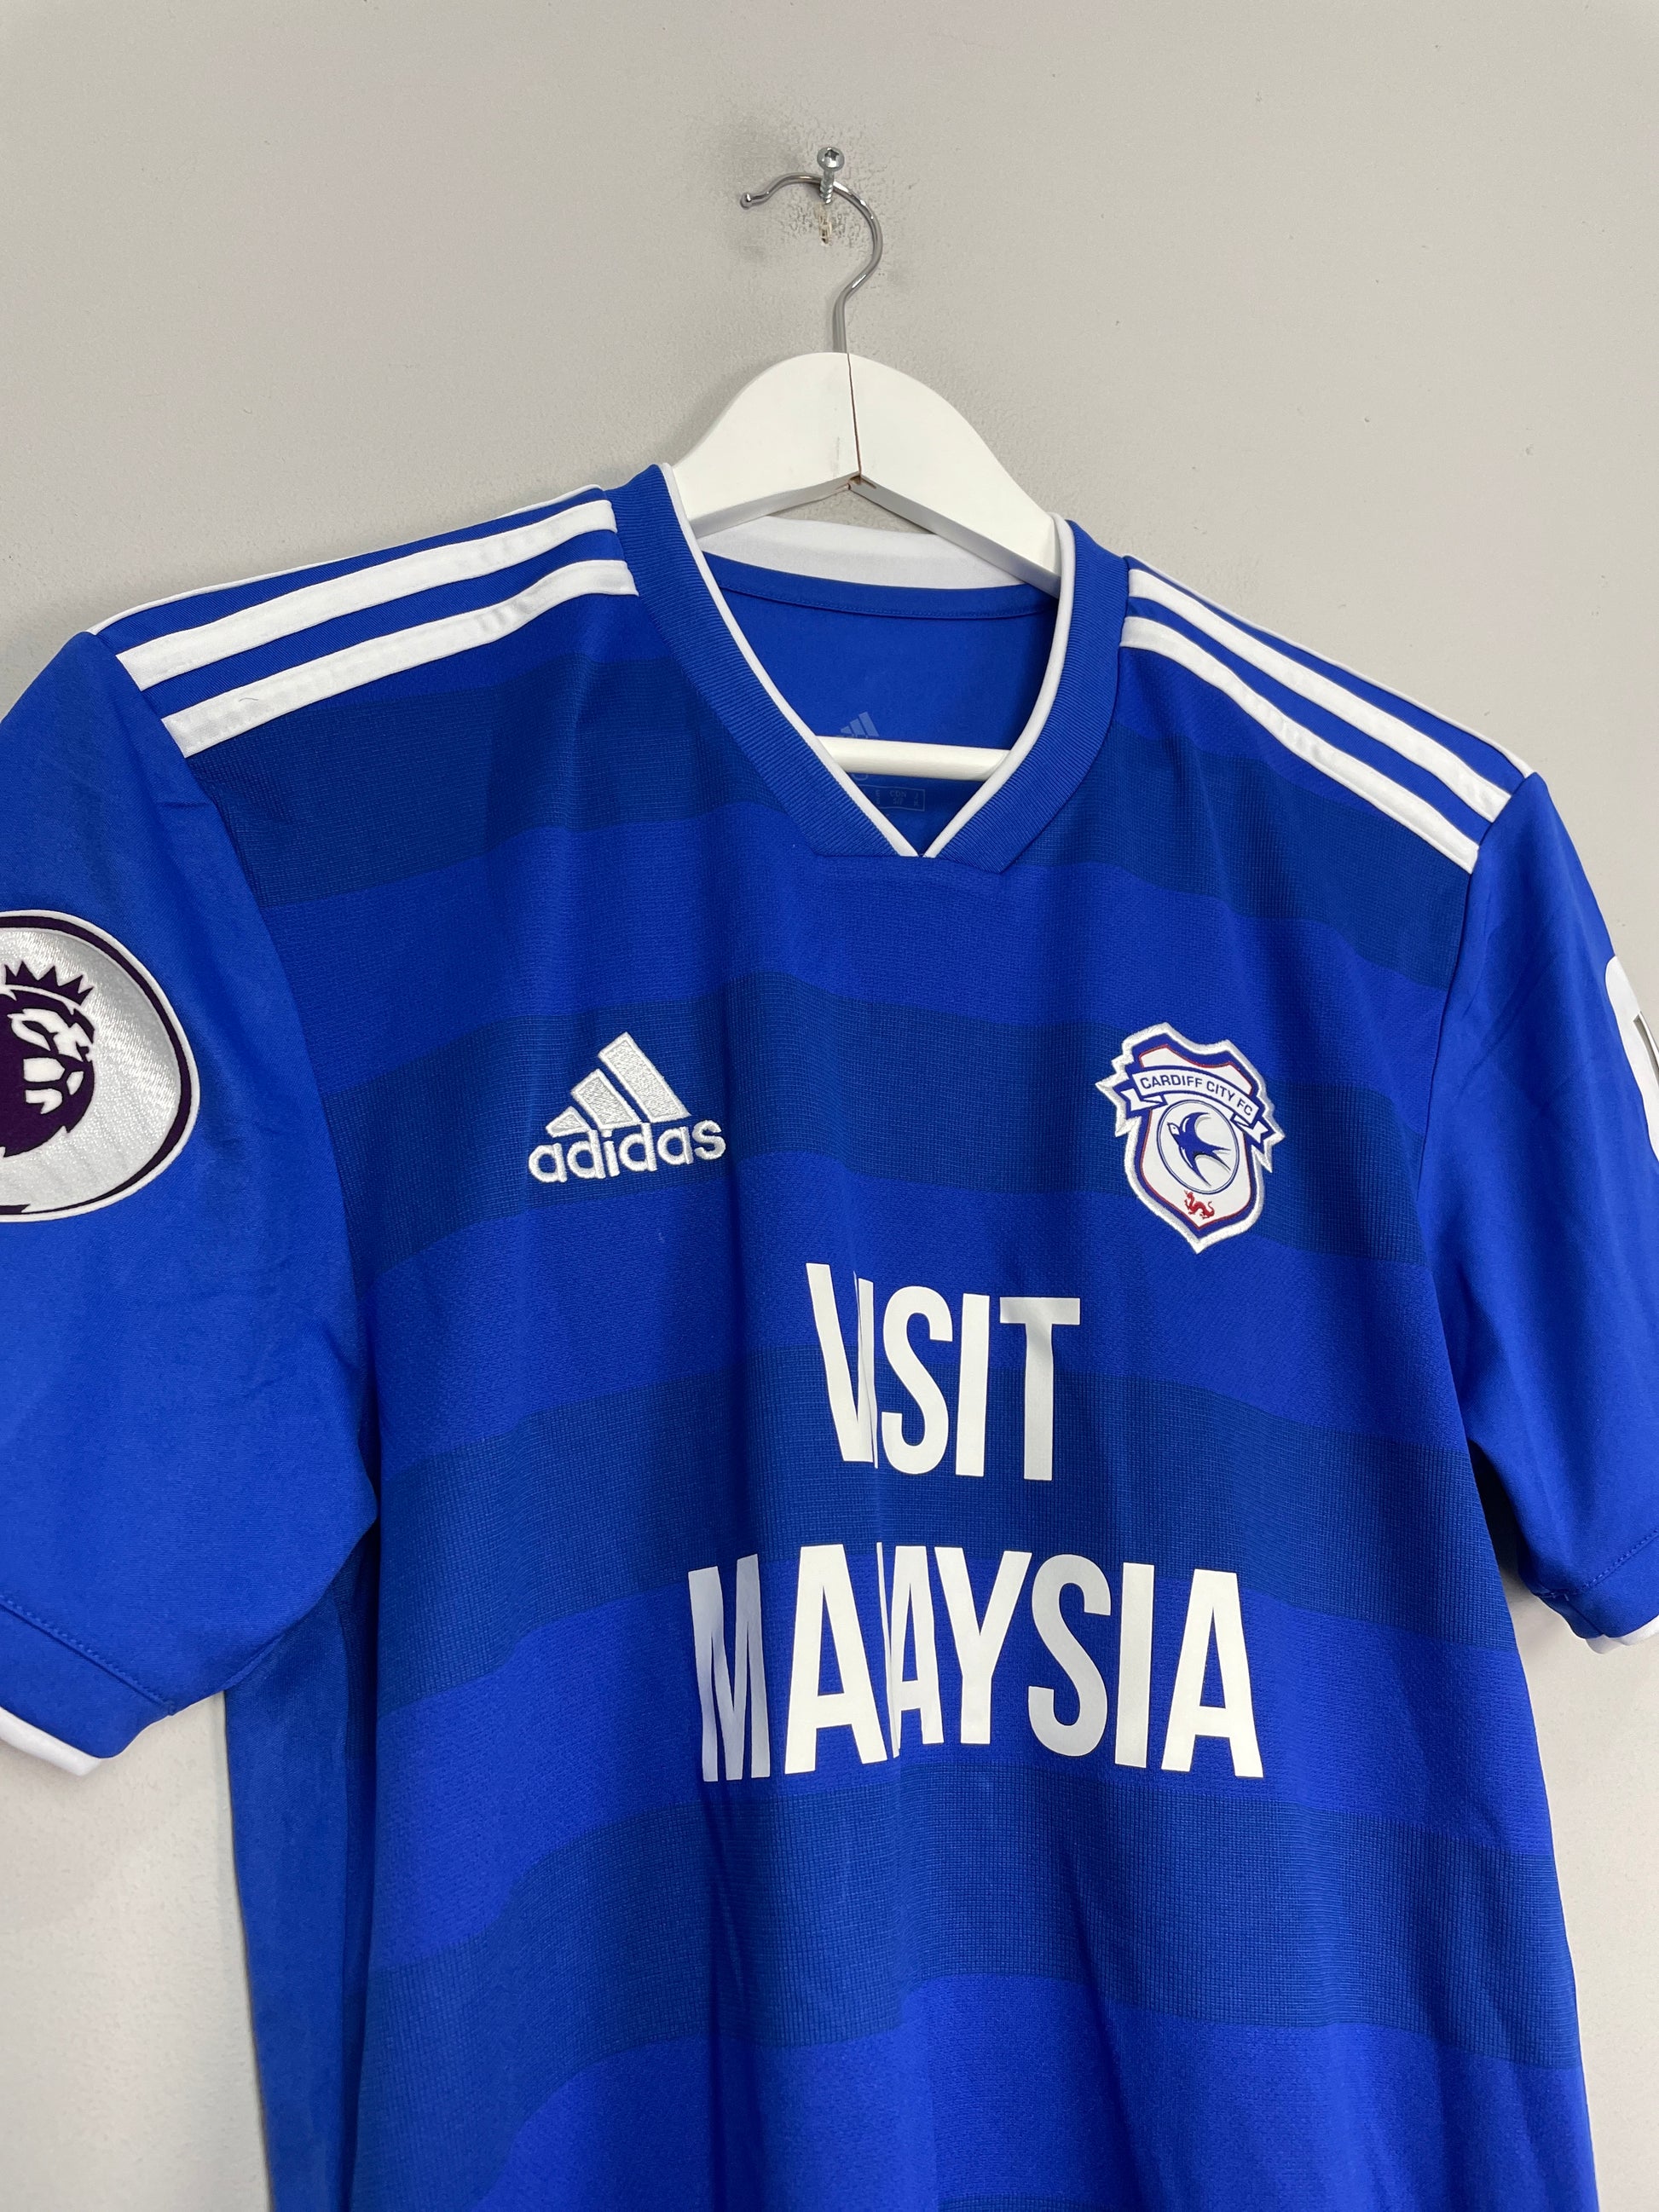 CULT KITS - 2018/19 CARDIFF RICHARDS #6 *MATCH ISSUE* HOME SHIRT